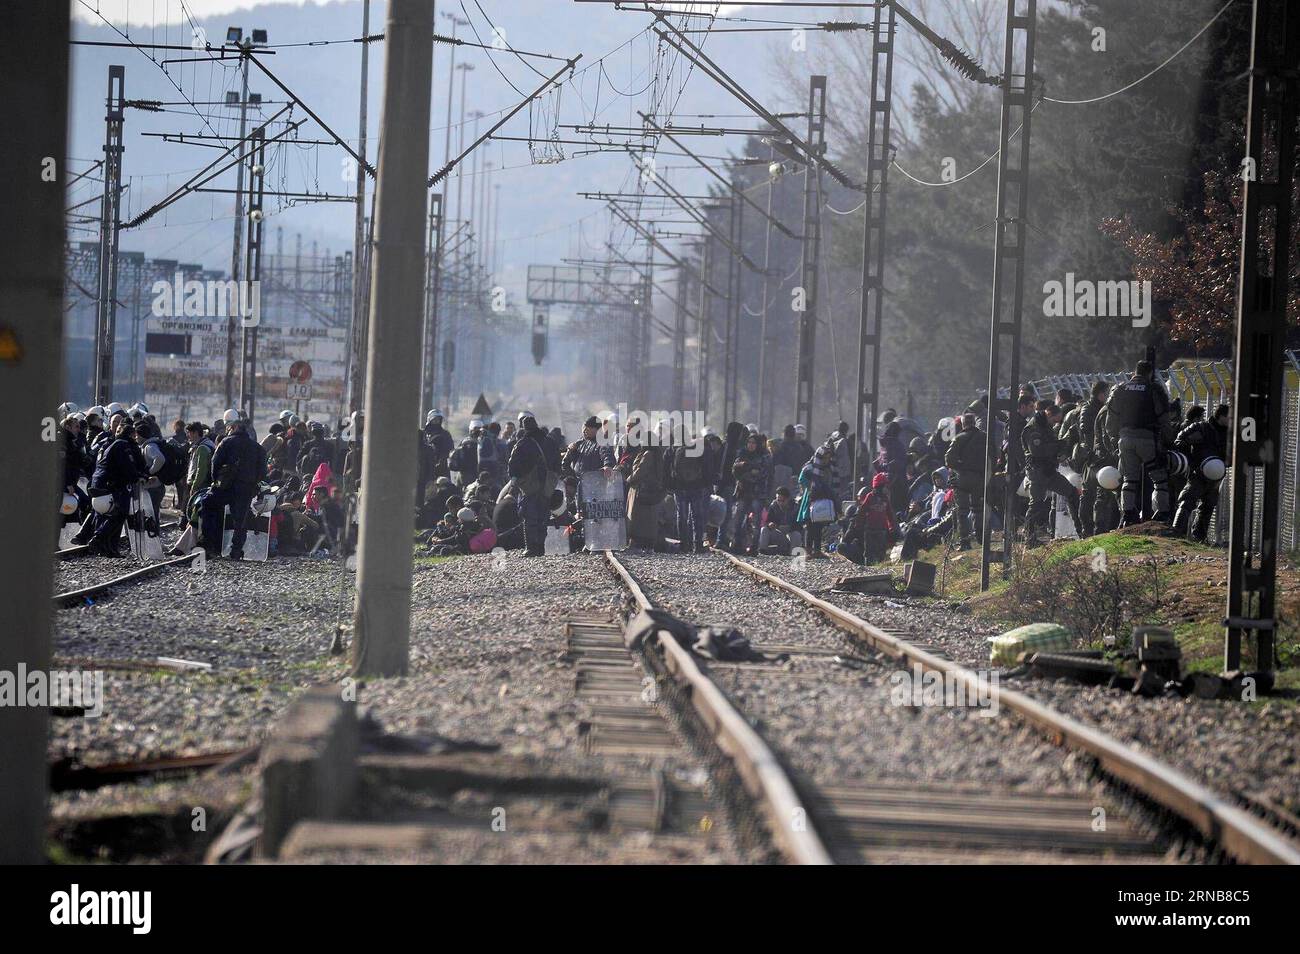 Afghan migrants protest and stand behind the wire fencing at the closed Greek-Macedonian border, near the Macedonian city of Gevgelija on Feb. 23, 2016. Macedonia has confirmed that it only allowed Syrian and Iraqi refugees through, matching a decision by its northern neighbor, Serbia. Around 5,000 migrants were waiting at the border wishing to continue their journey across Macedonia, Serbia, Croatia, Slovenia and then Austria, with Germany the final goal for most. MACEDONIA-GEVGELJA-MIGRANTS Biljana, PUBLICATIONxNOTxINxCHN   Afghan Migrants Protest and stand behind The Wire fencing AT The Clo Stock Photo